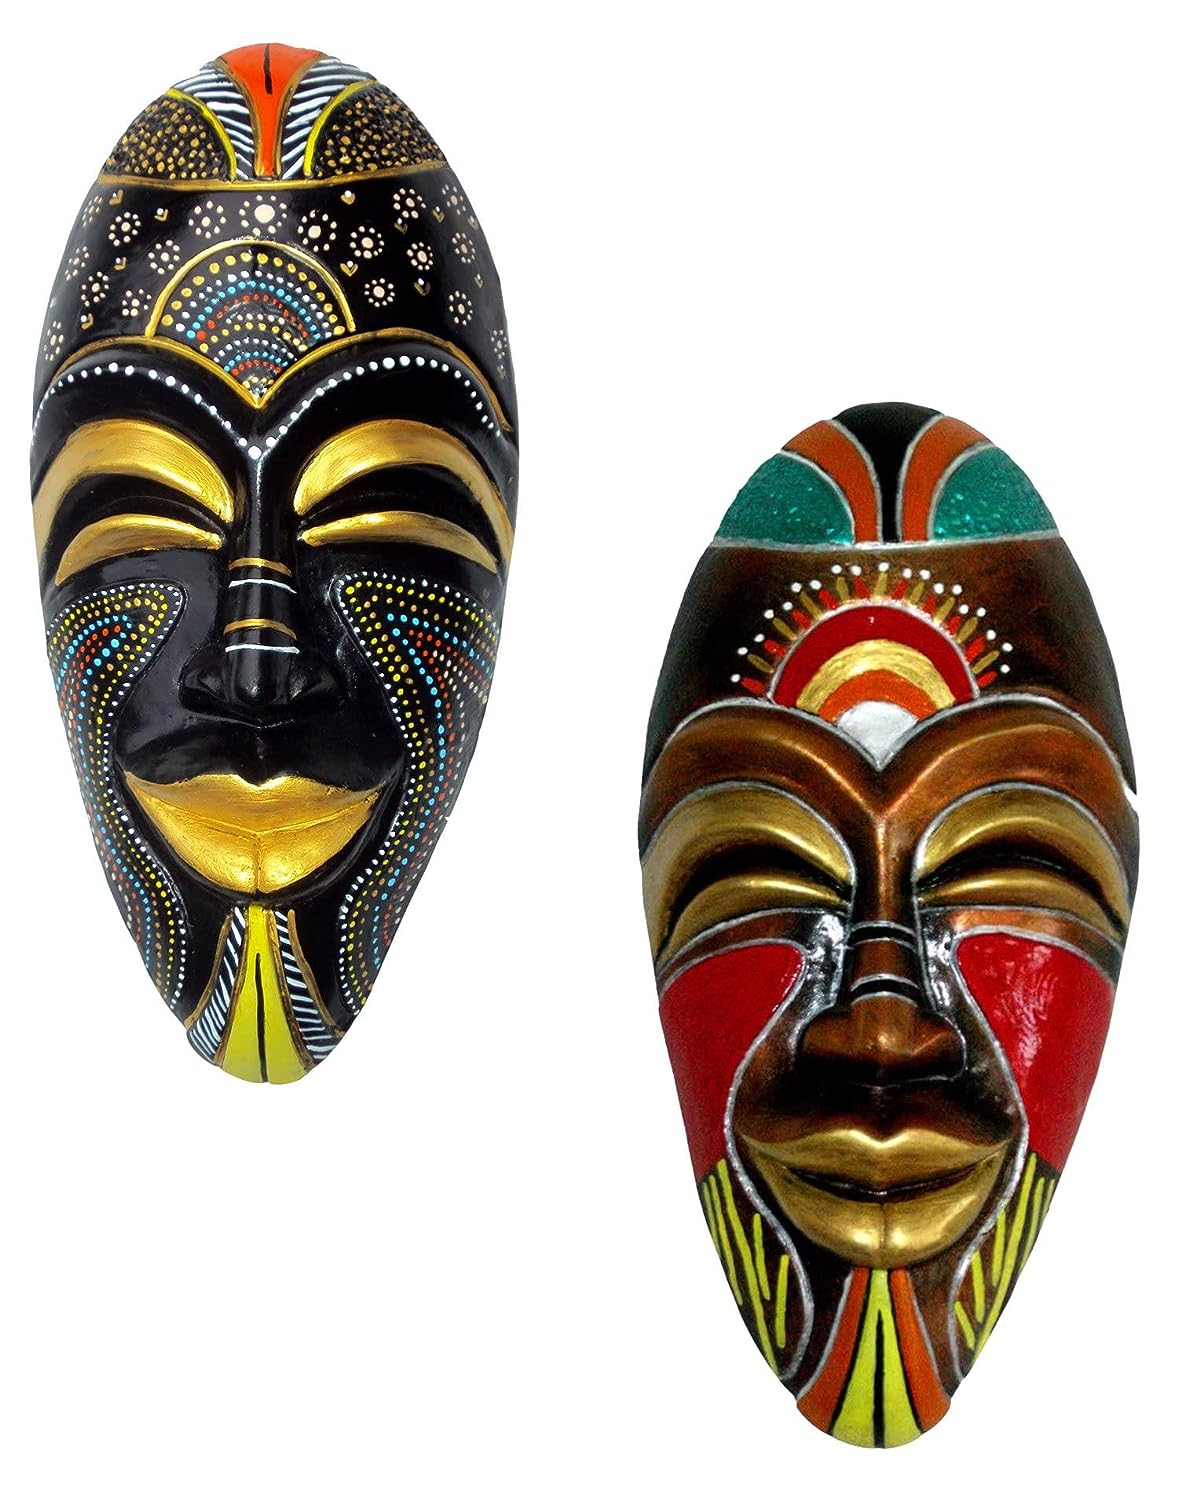 NEW LIFE Eco Friendly Terracotta Home Decorative Wall Hanging African Wall Decorative Mask Showpiece -(40 cms, Multicolour)